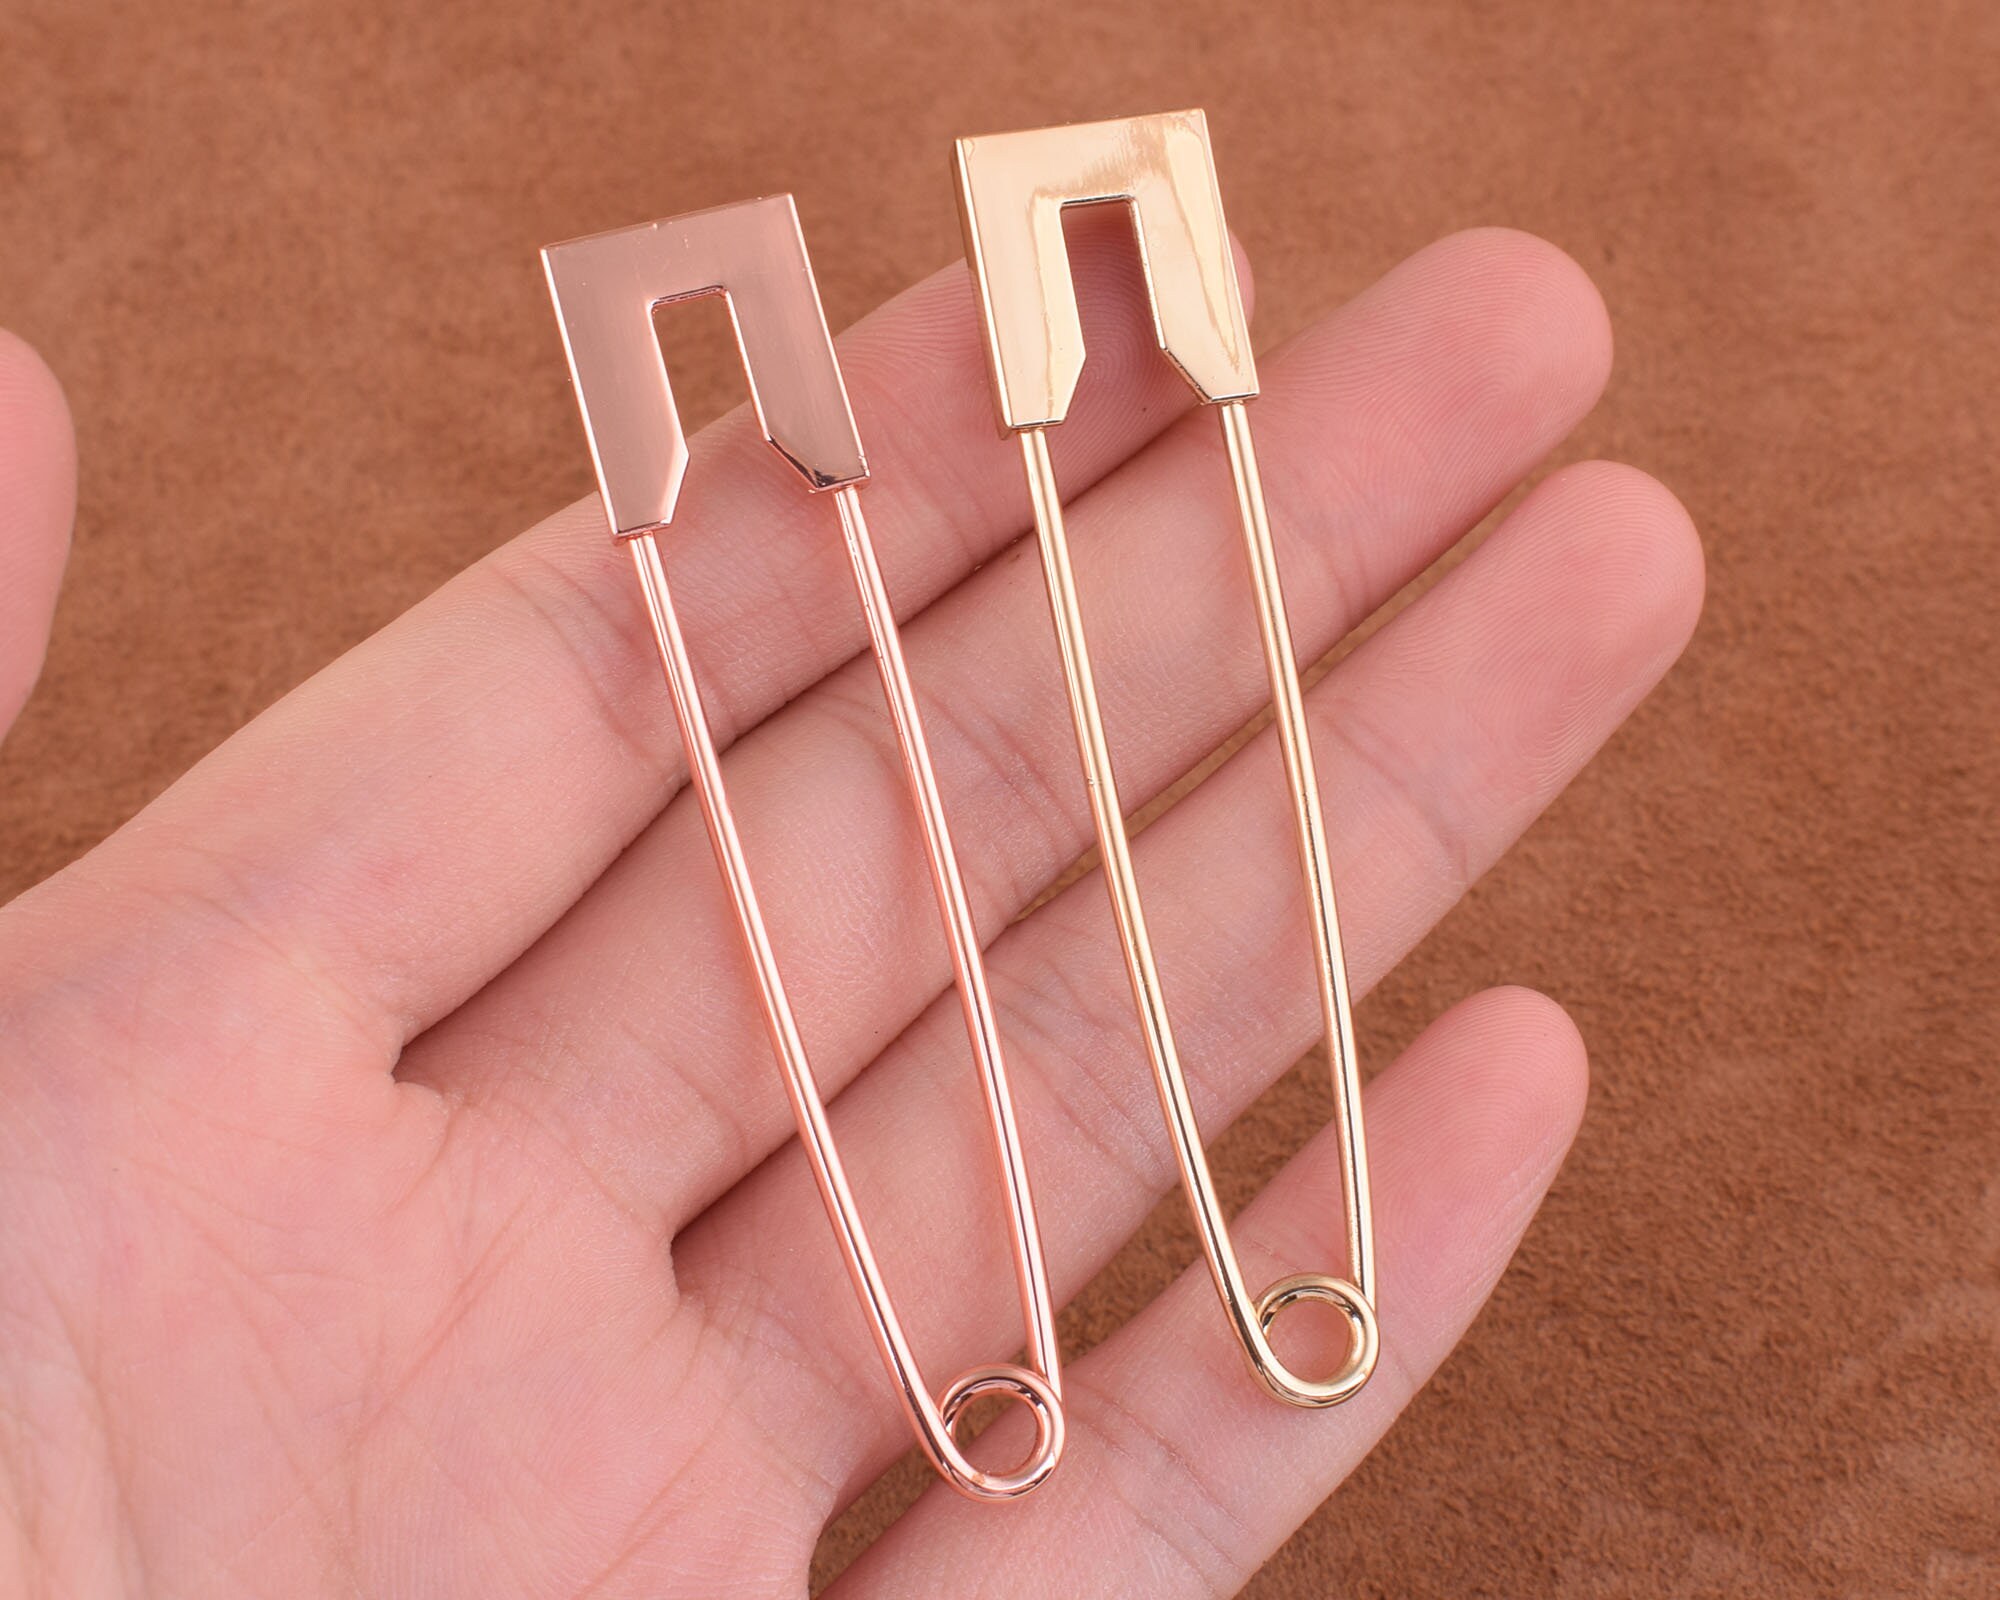 56 Mm Gold and Rose Gold Safety Pins,large Safety Pin Brooch,charm  Holder,rose Gold Brooch Pin,kilt Pin Label Pin Brooch Pendant Connector 